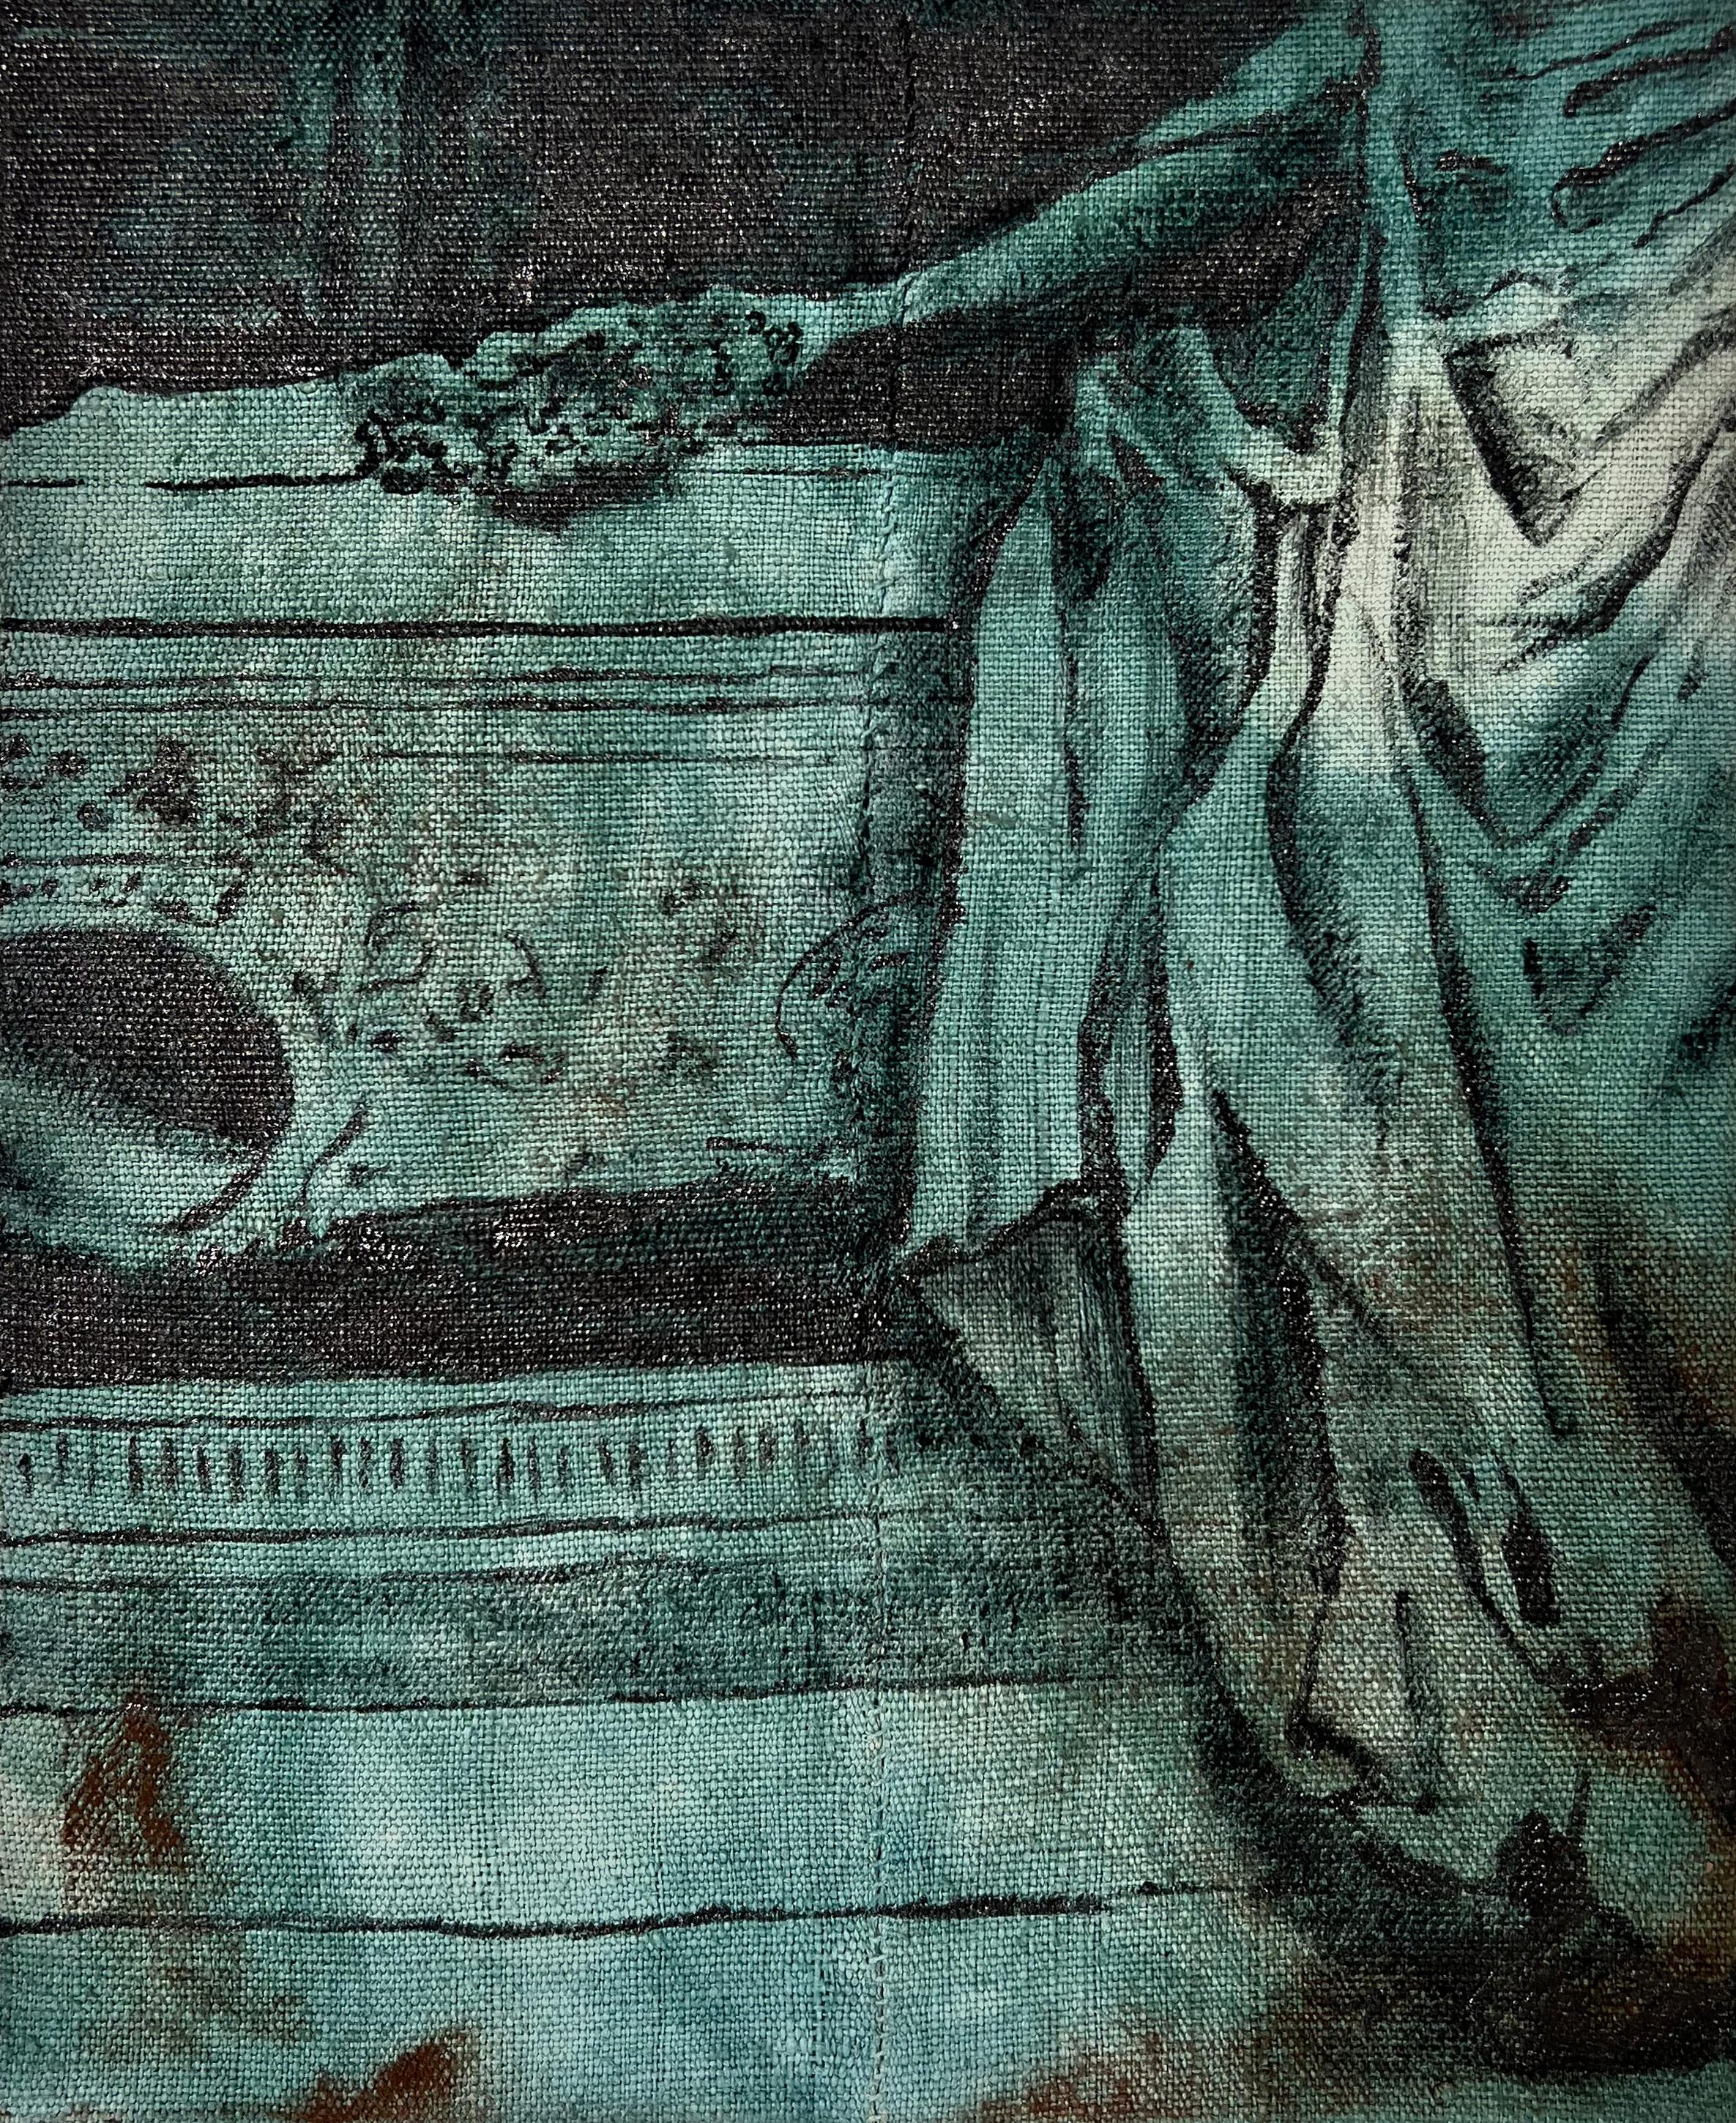 Nicholas Evans Abstract Painting - "Final Offering" (emotional, antique, statue painting on green dyed canvas)